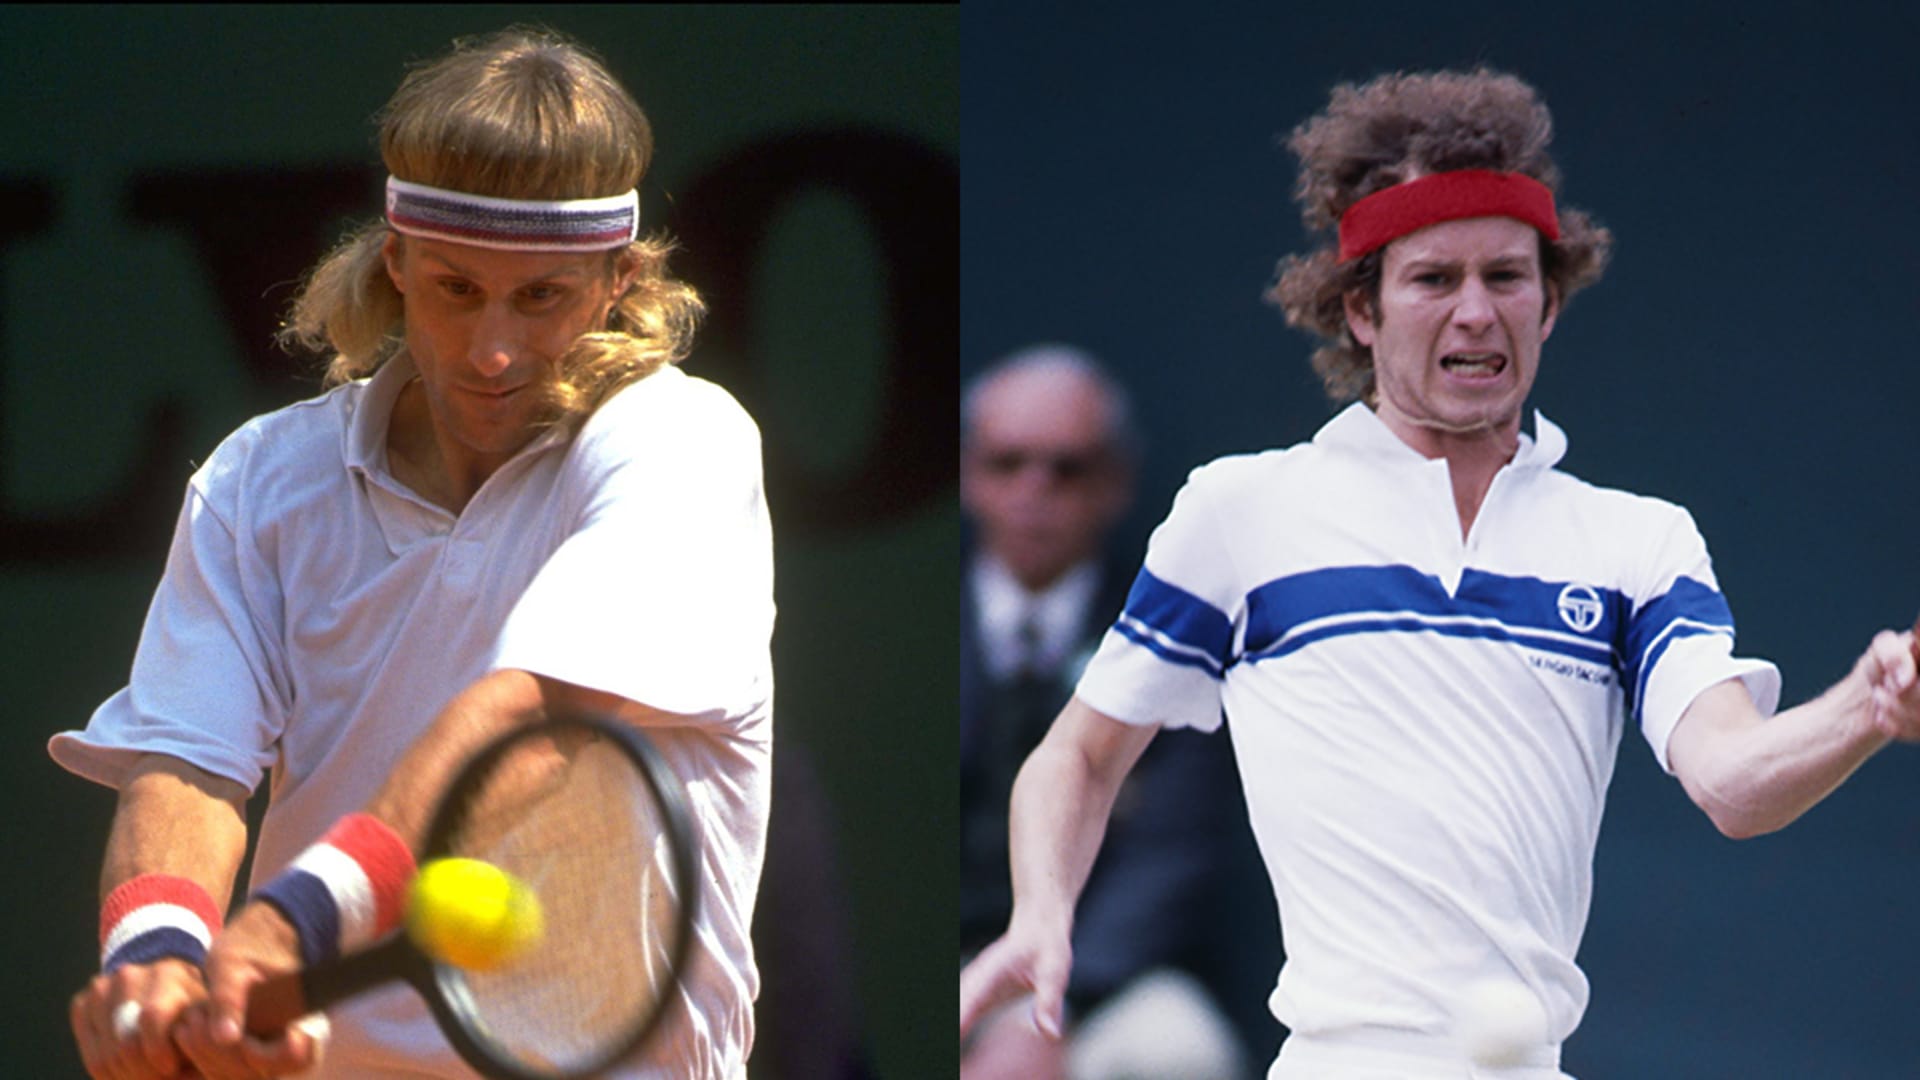 TBT, 1978 Stockholm When Borg met McEnroe for the first time